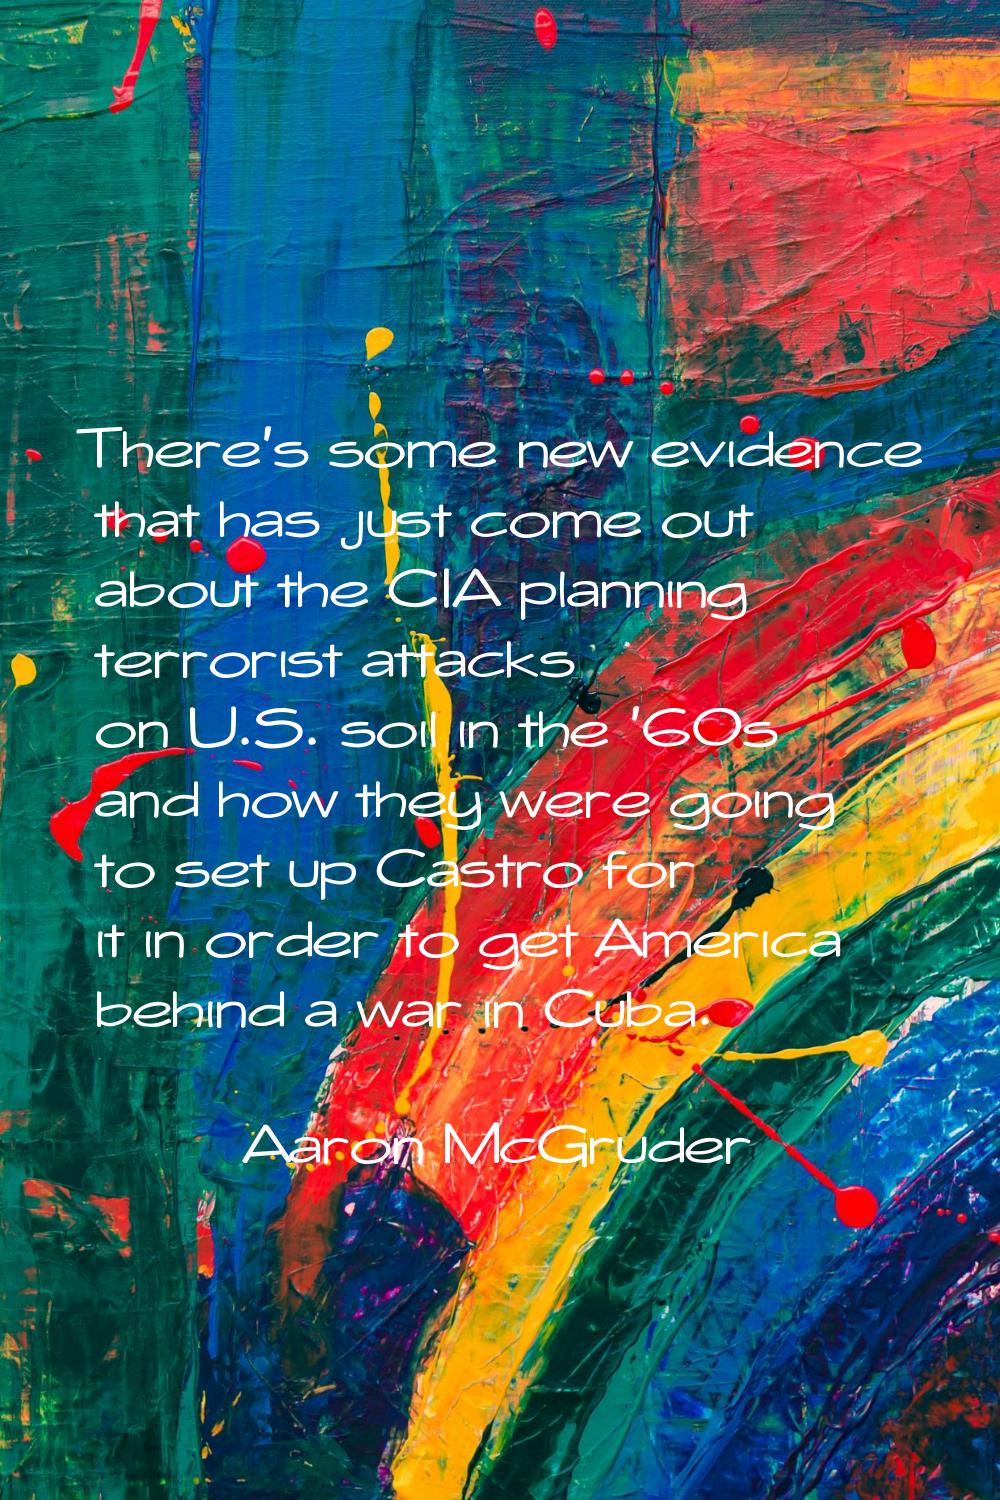 There's some new evidence that has just come out about the CIA planning terrorist attacks on U.S. s